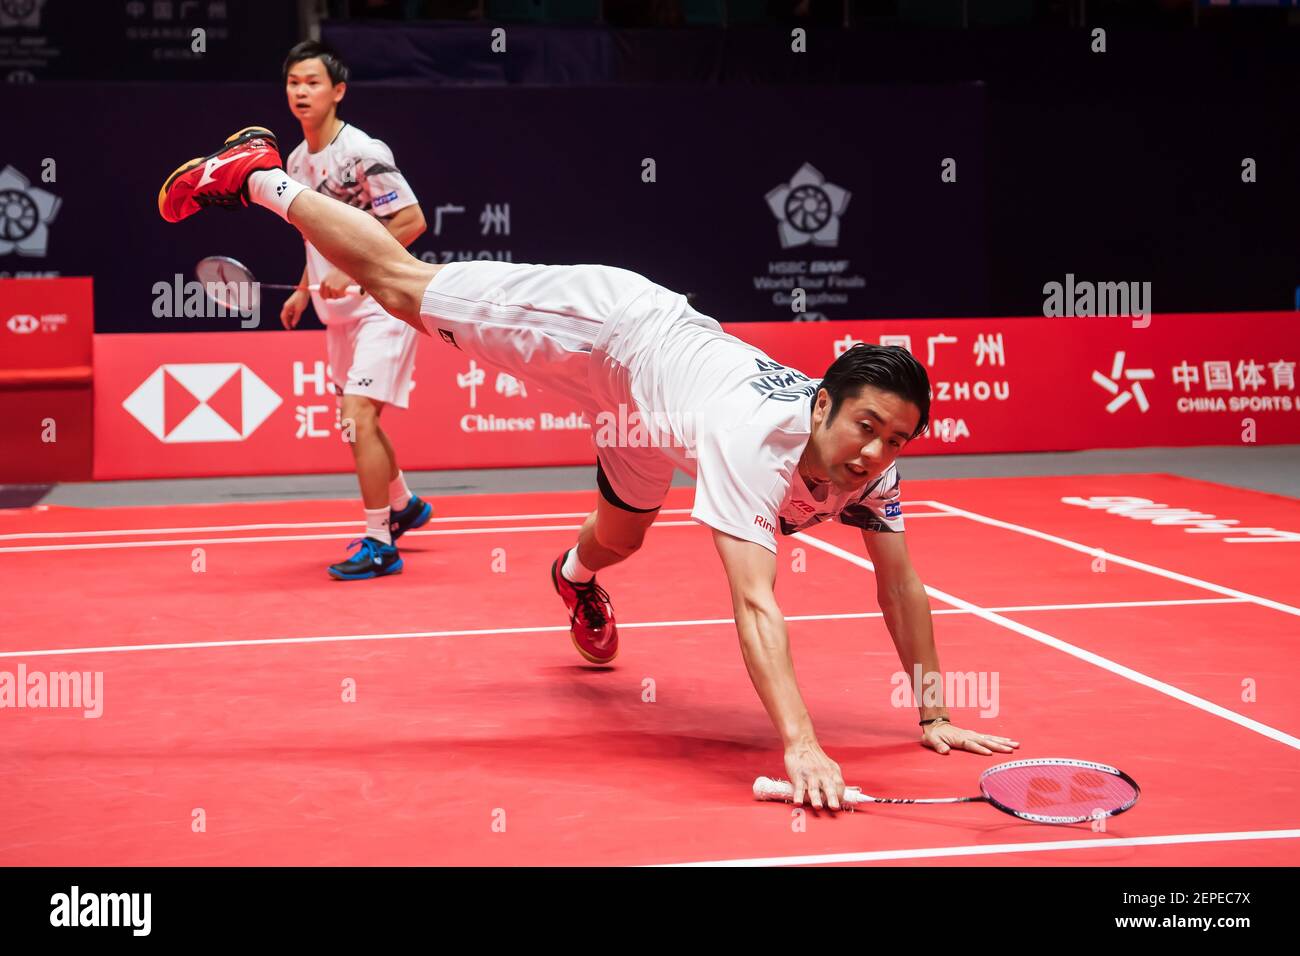 Japanese professional badminton players Hiroyuki Endo and Yuta Watanabe compete against Japanese professional badminton players Keigo Sonoda and Takeshi Kamura at the group stage of mens doubles at HSBC BWF World Tour